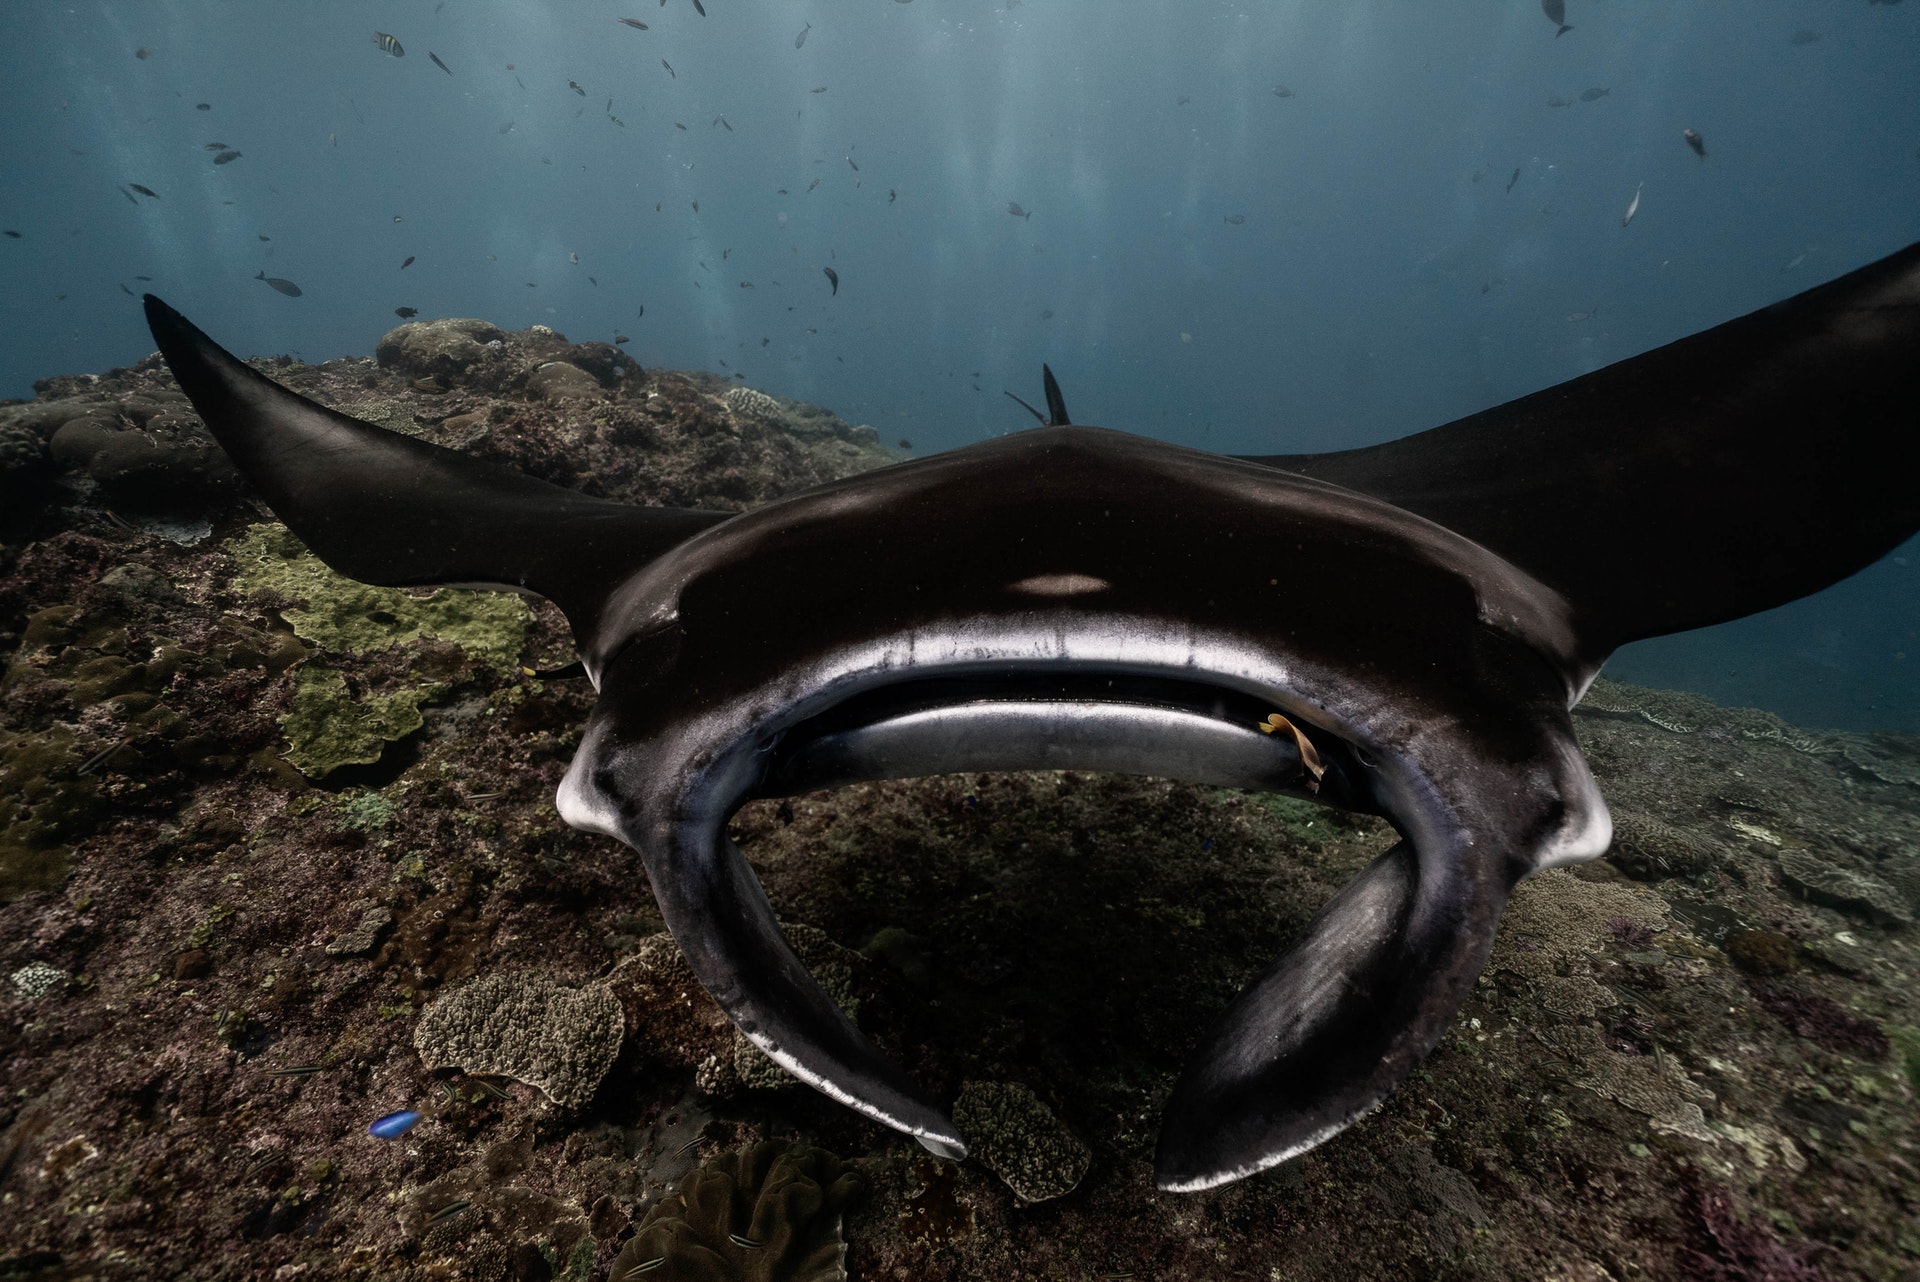 DISCOVER THE WORLD'S LARGEST MANTA RAY EVER RECORDED